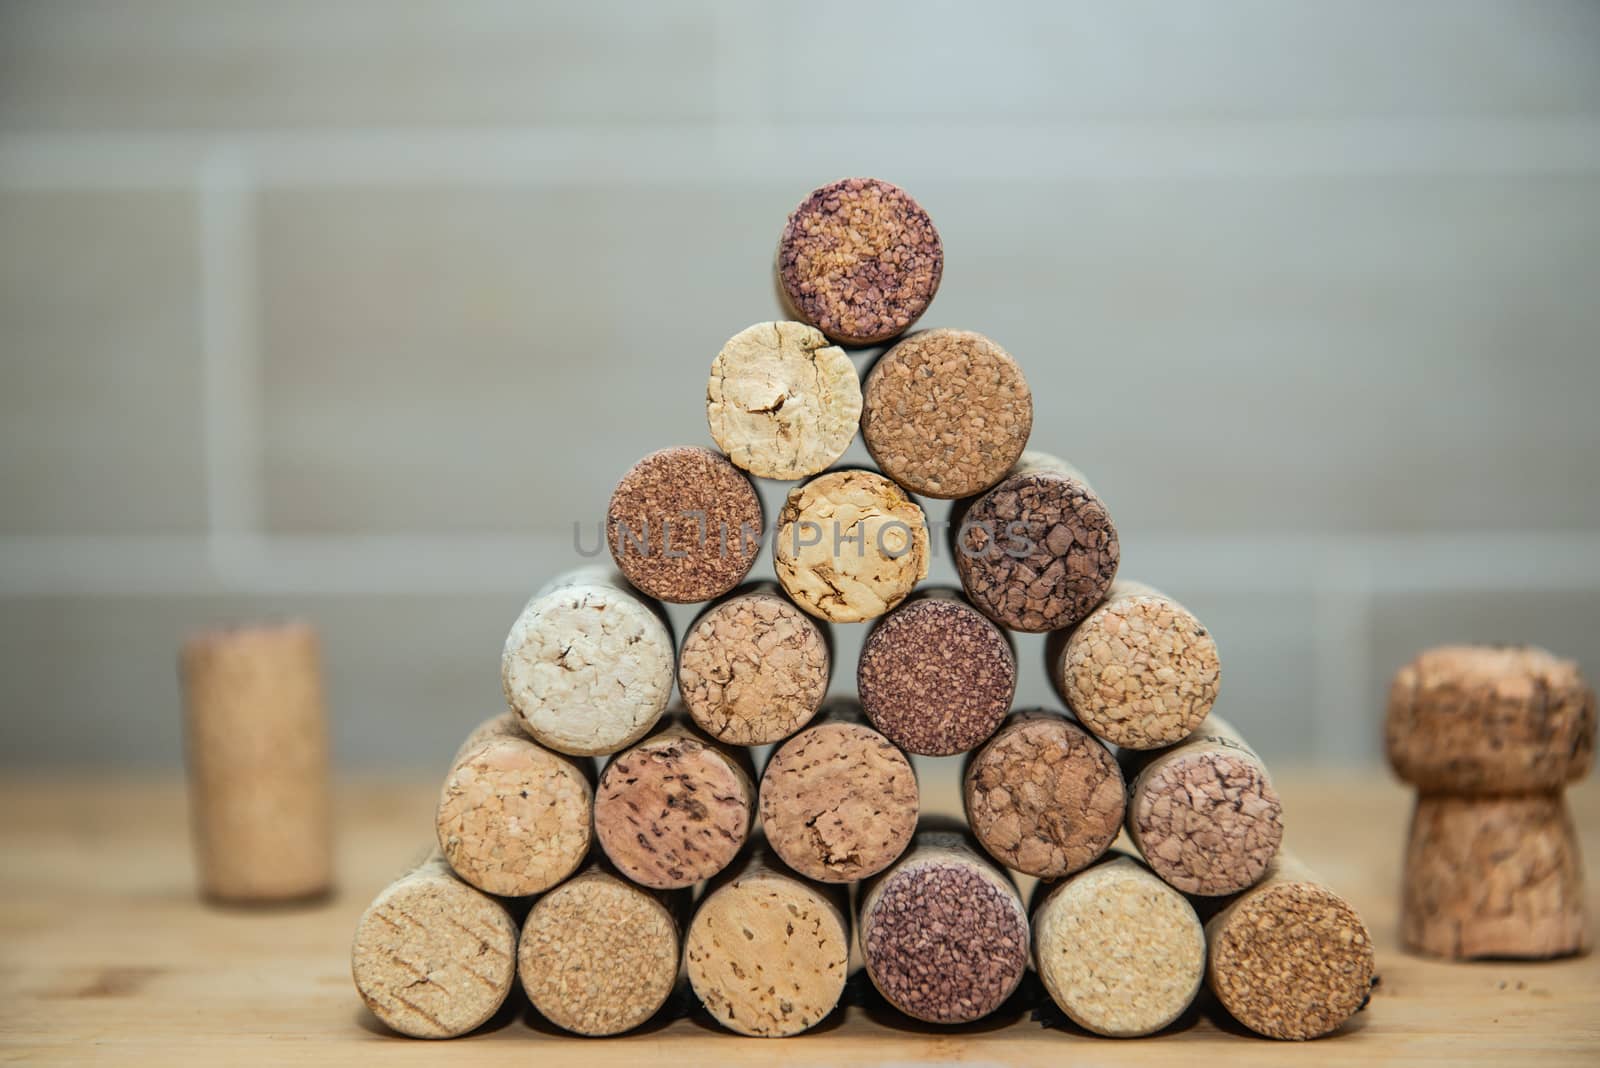 wine corks stacked on each other in a triangle by marynkin